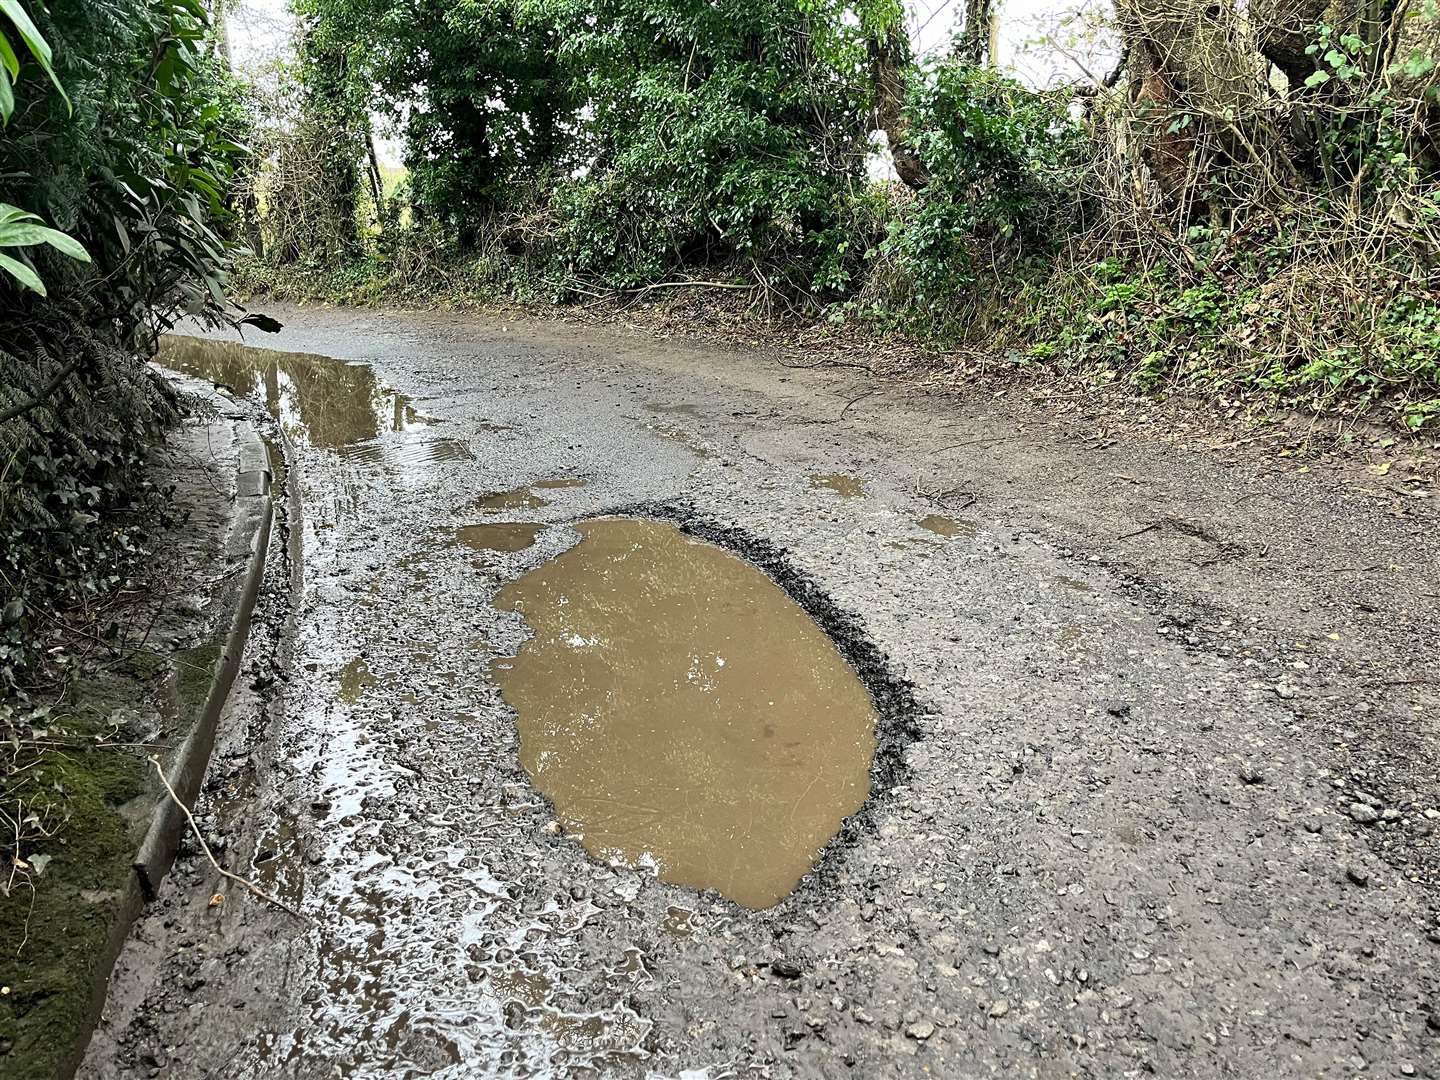 The funding must be used by councils to fix potholes